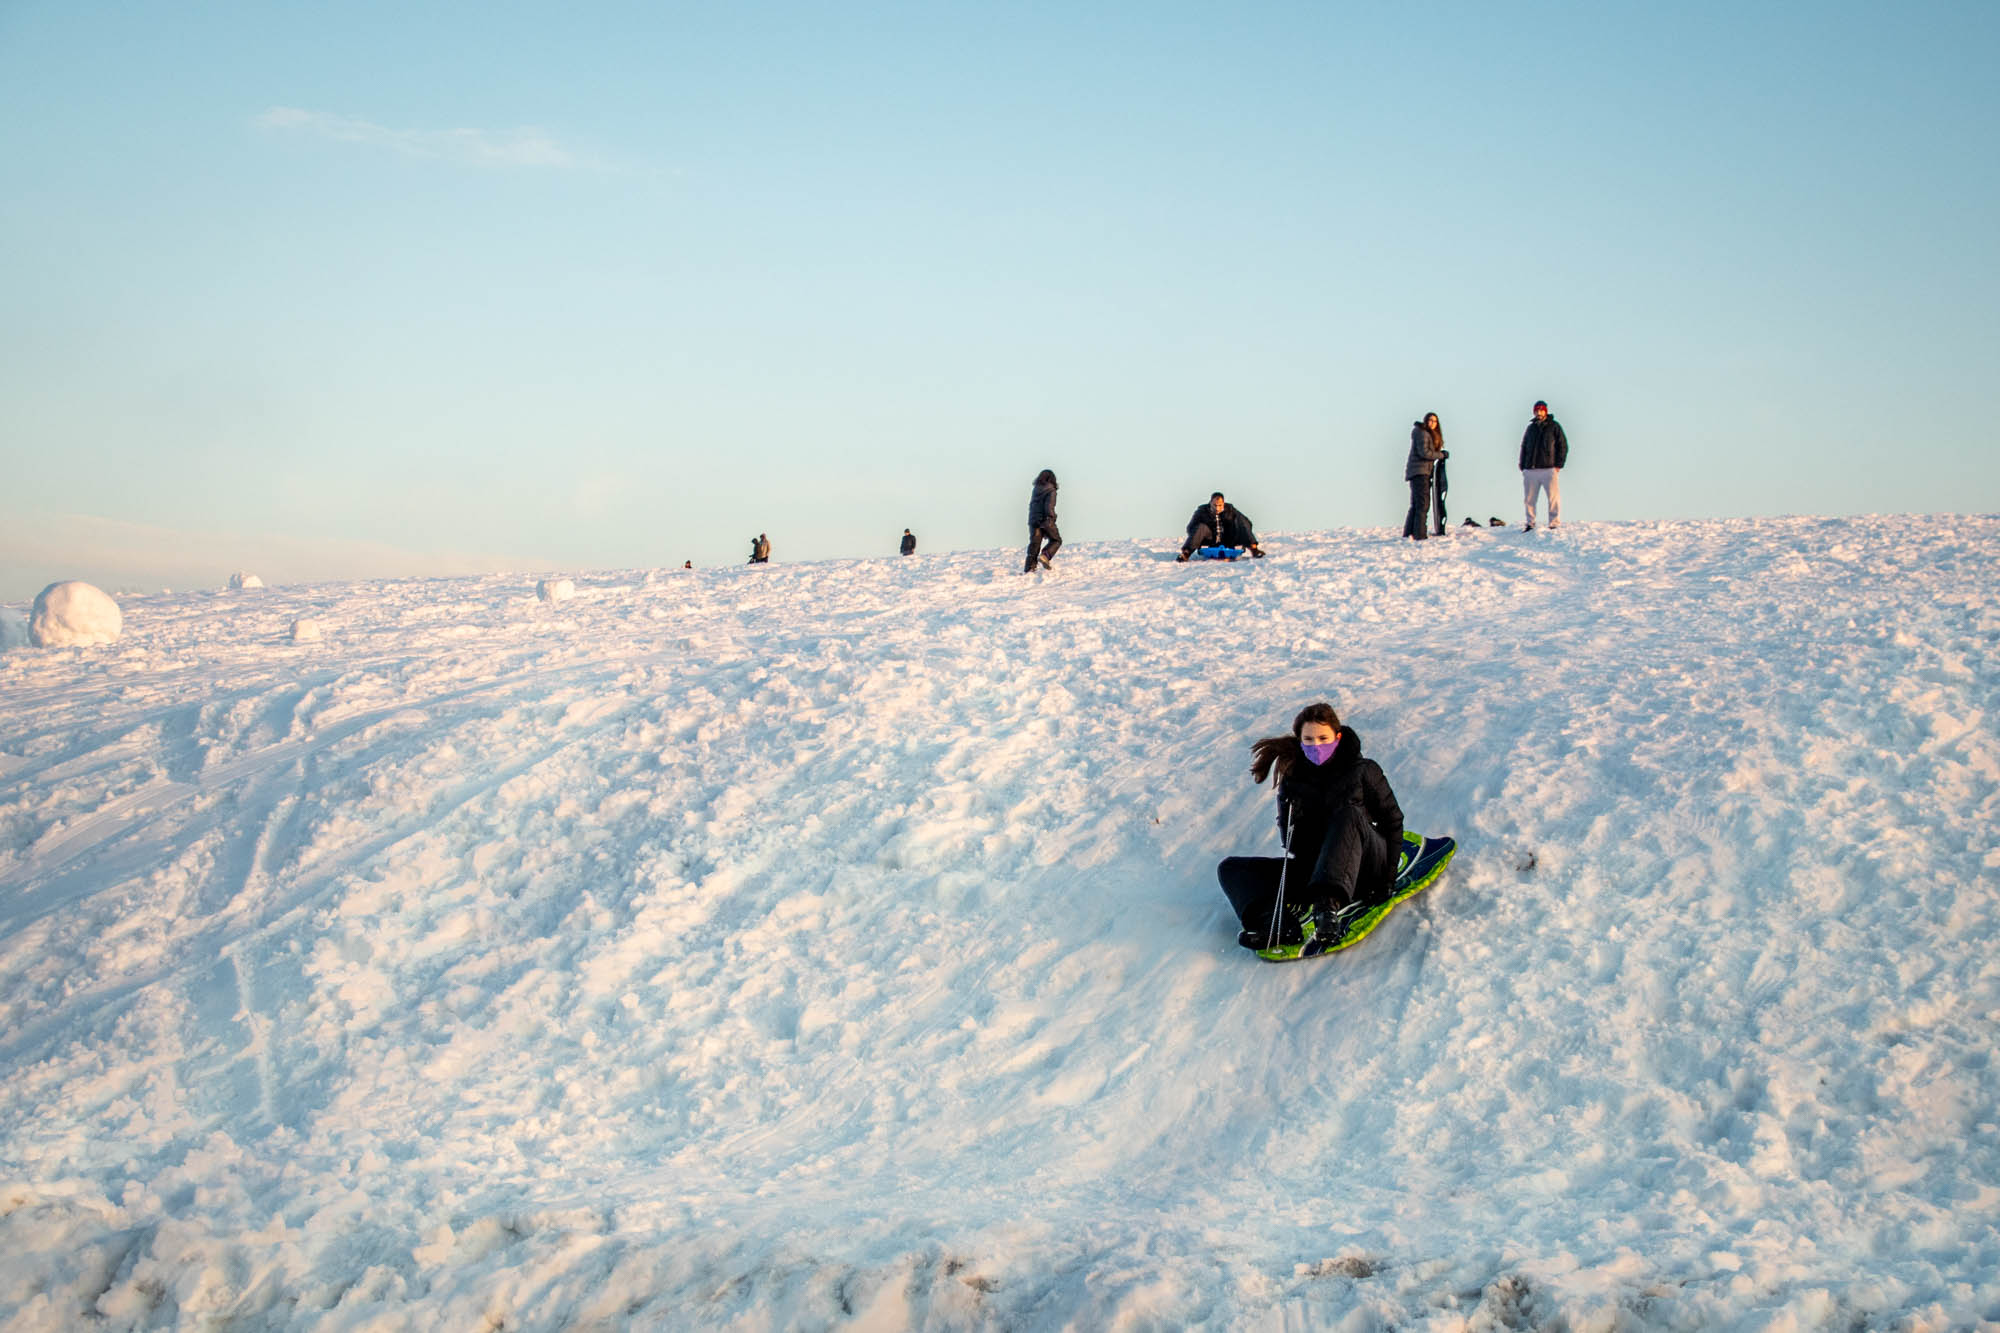 People sledding on a snowy hill